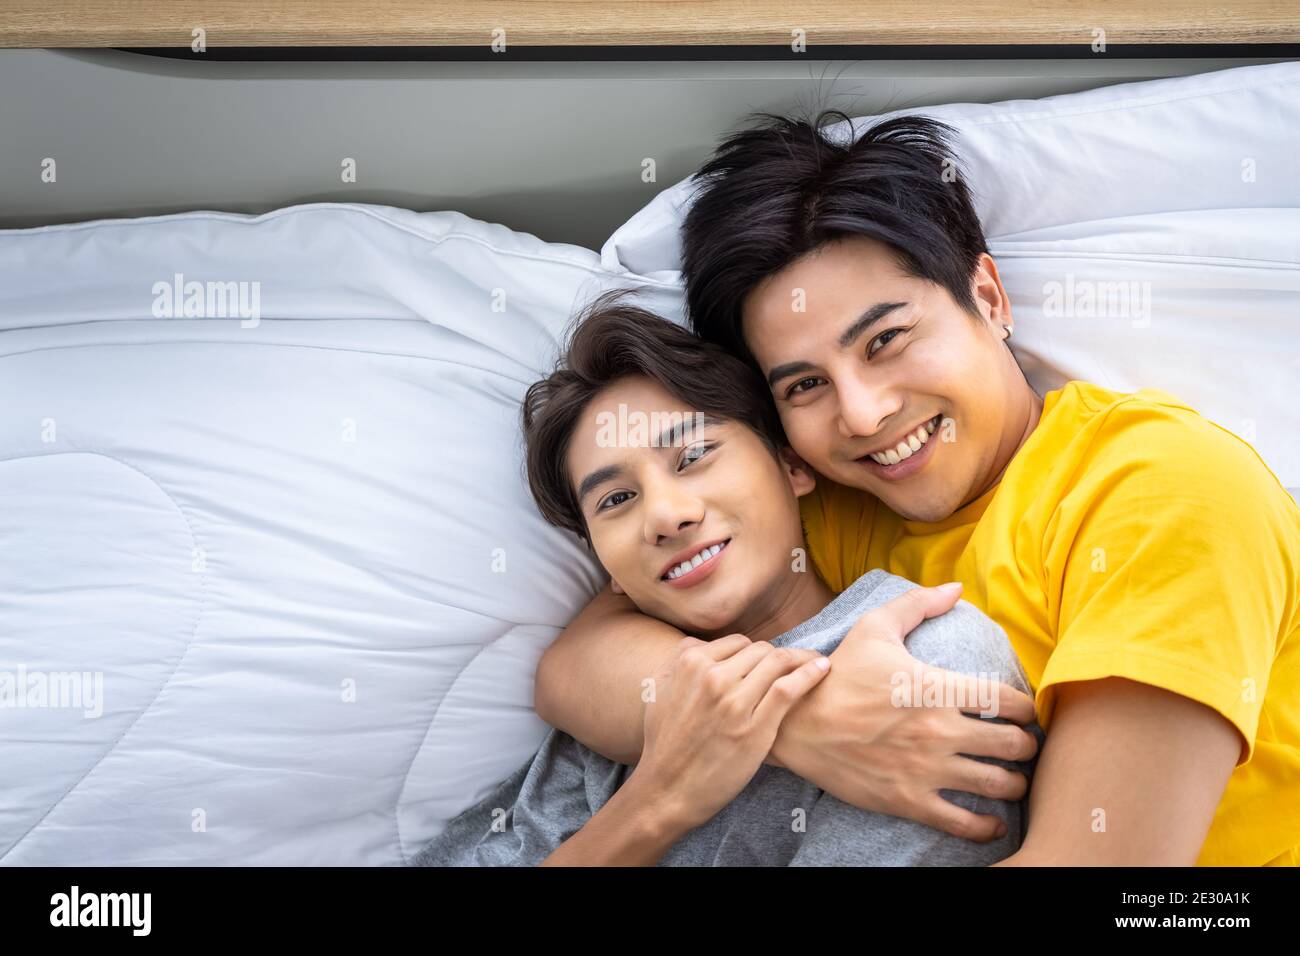 Happy Asian homosexual gay men male couple lying and embracing on bed. LGBT and sexual diversity concept. Looking at camera. Stock Photo